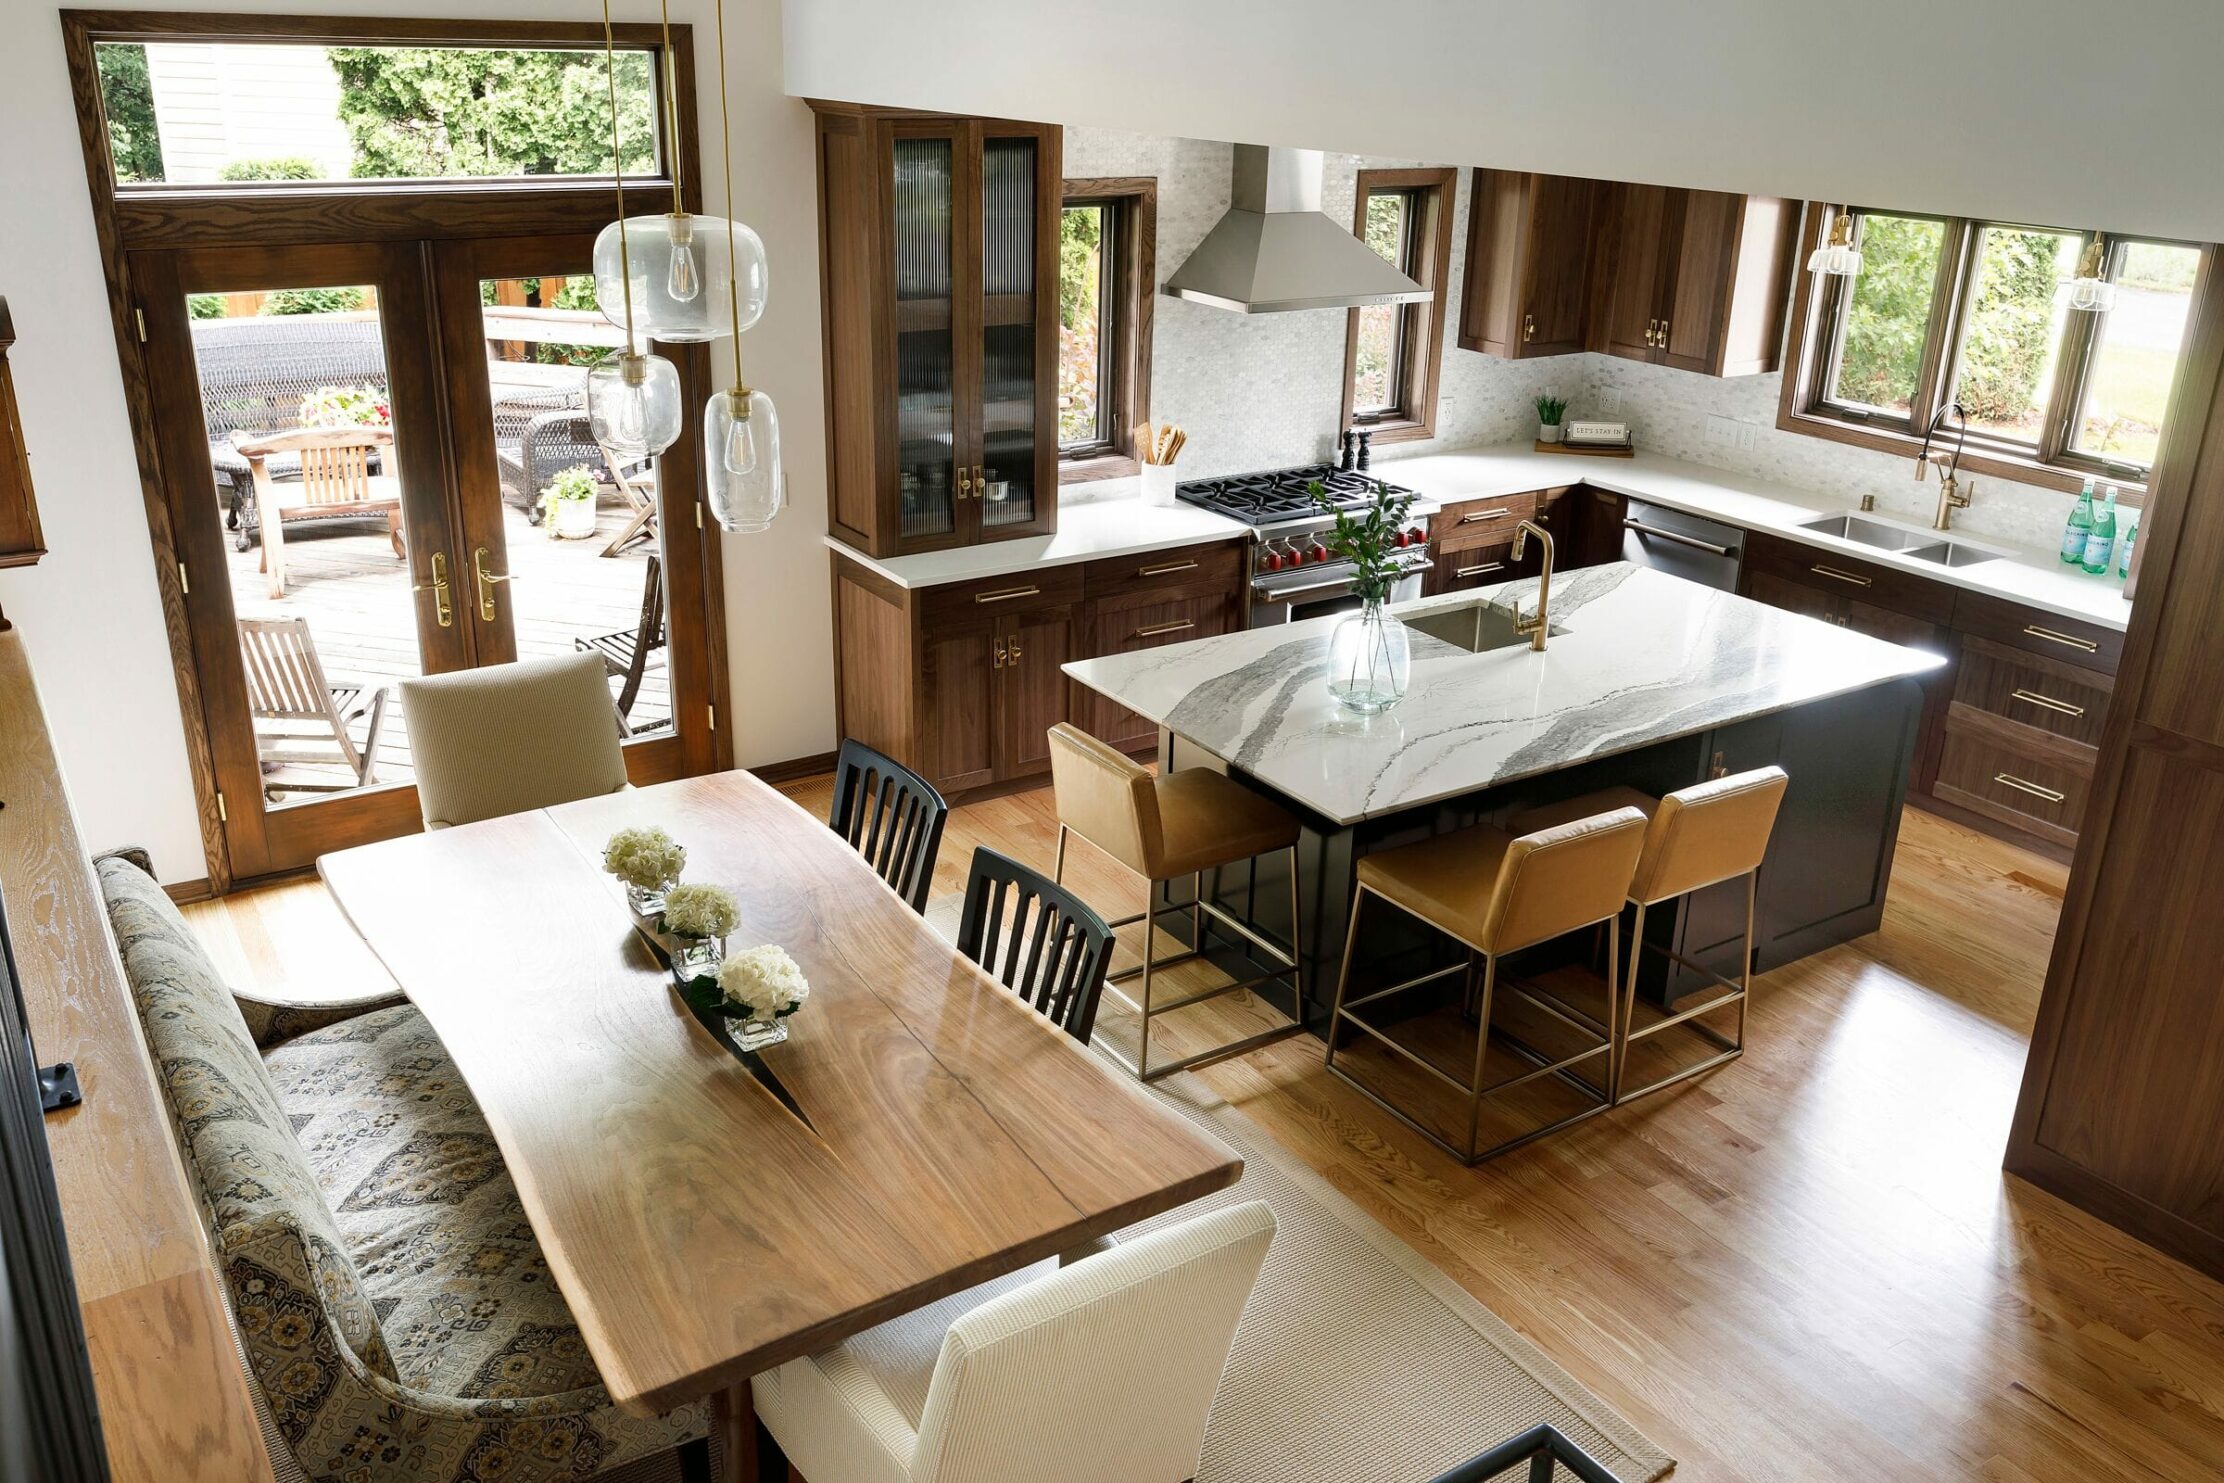 Kitchen with multiple seating areas.